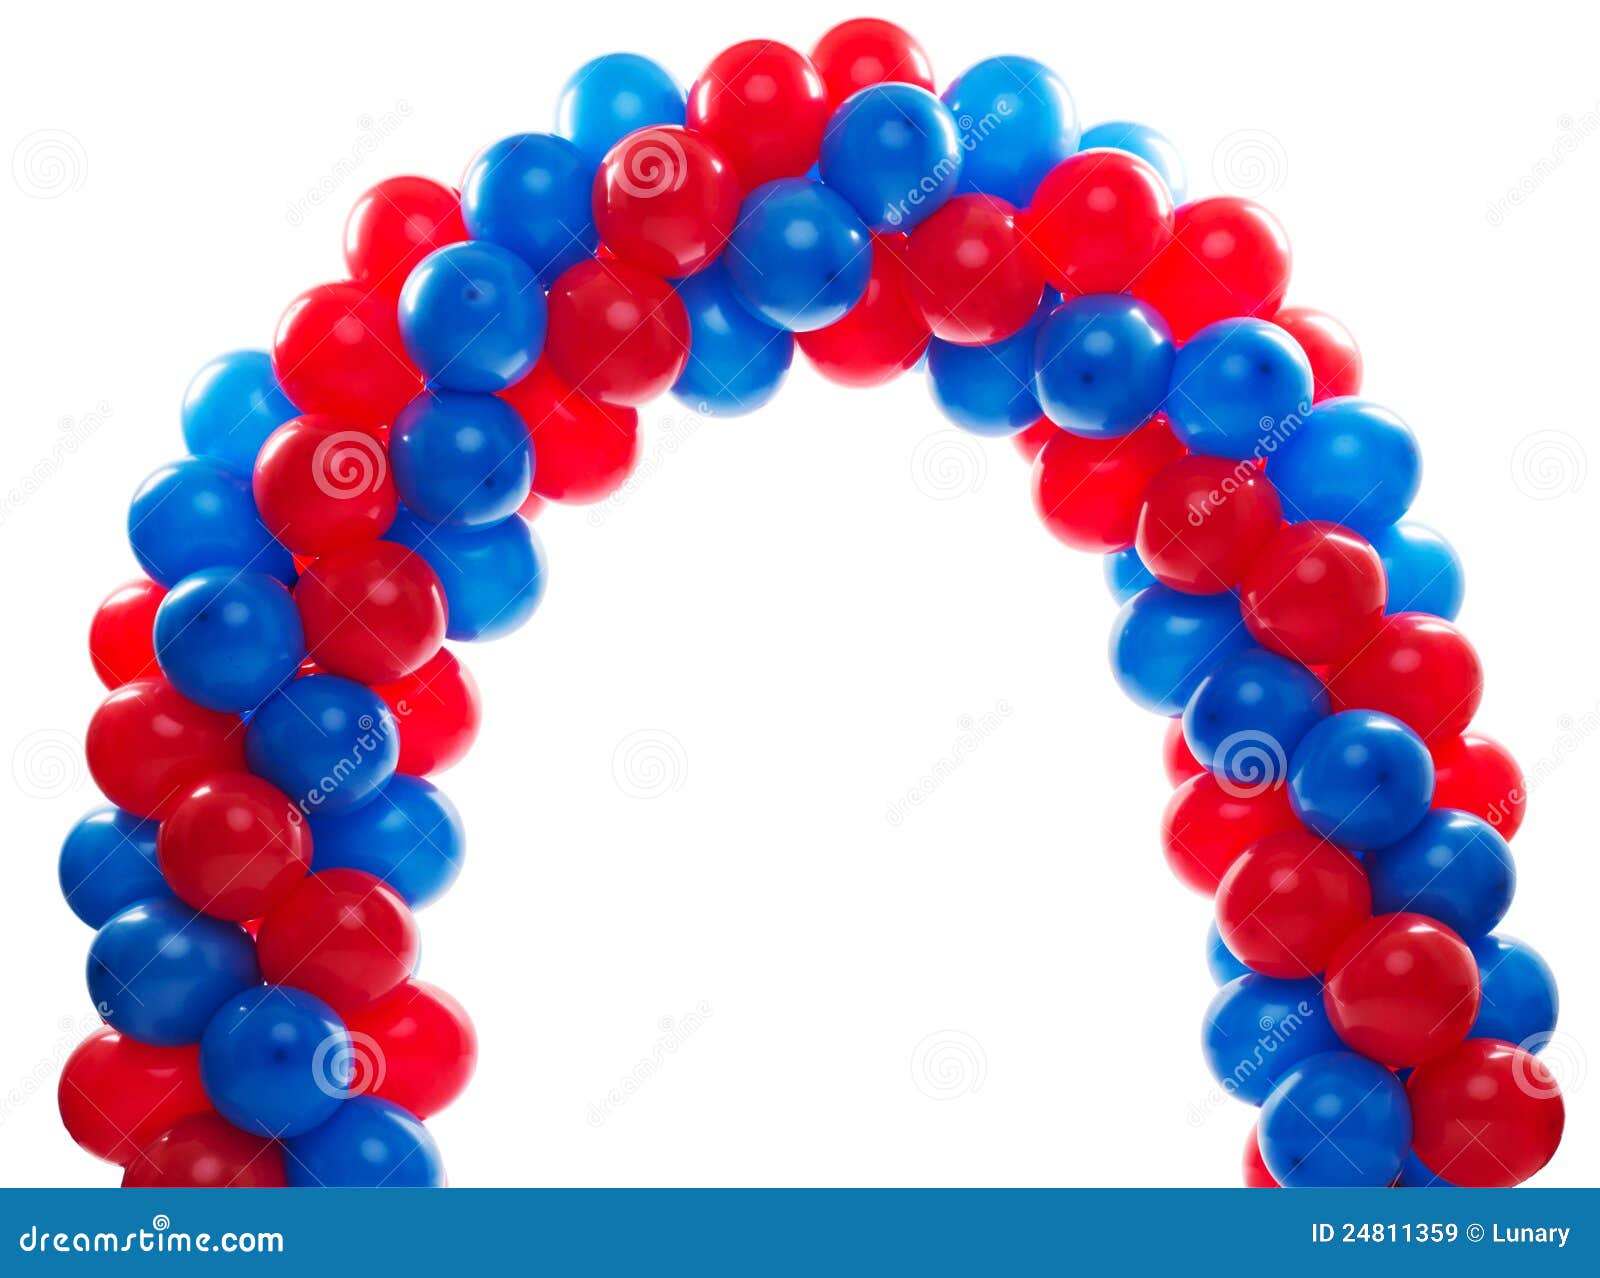 Arch Of Red And Blue Balloons Royalty Free Stock Images - Image: 24811359